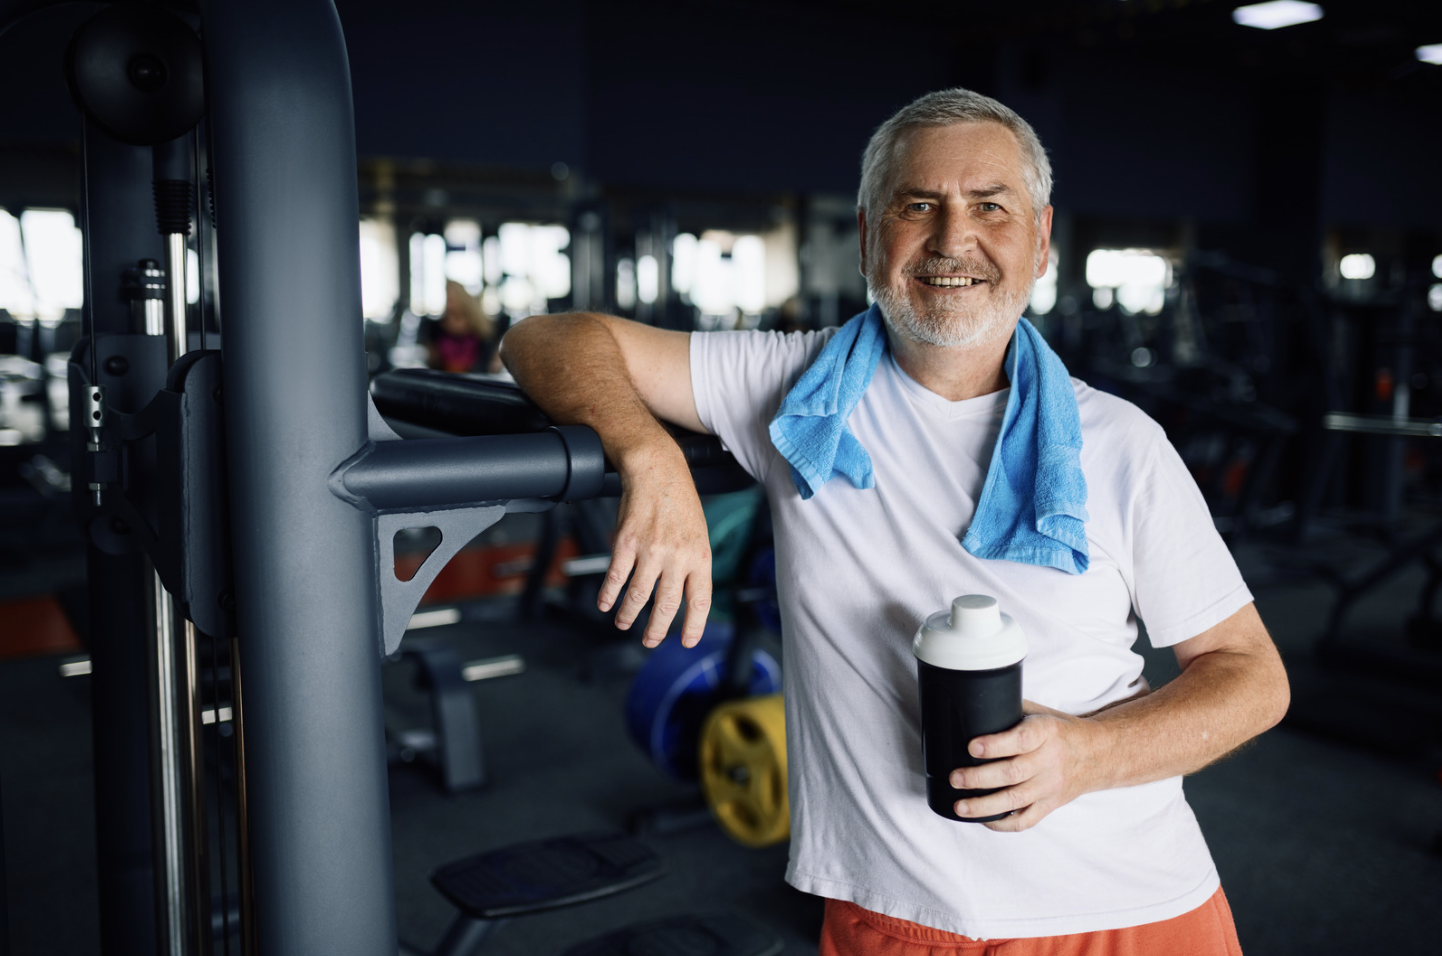 Exercising over 50 can lead to living a happier and longer life.